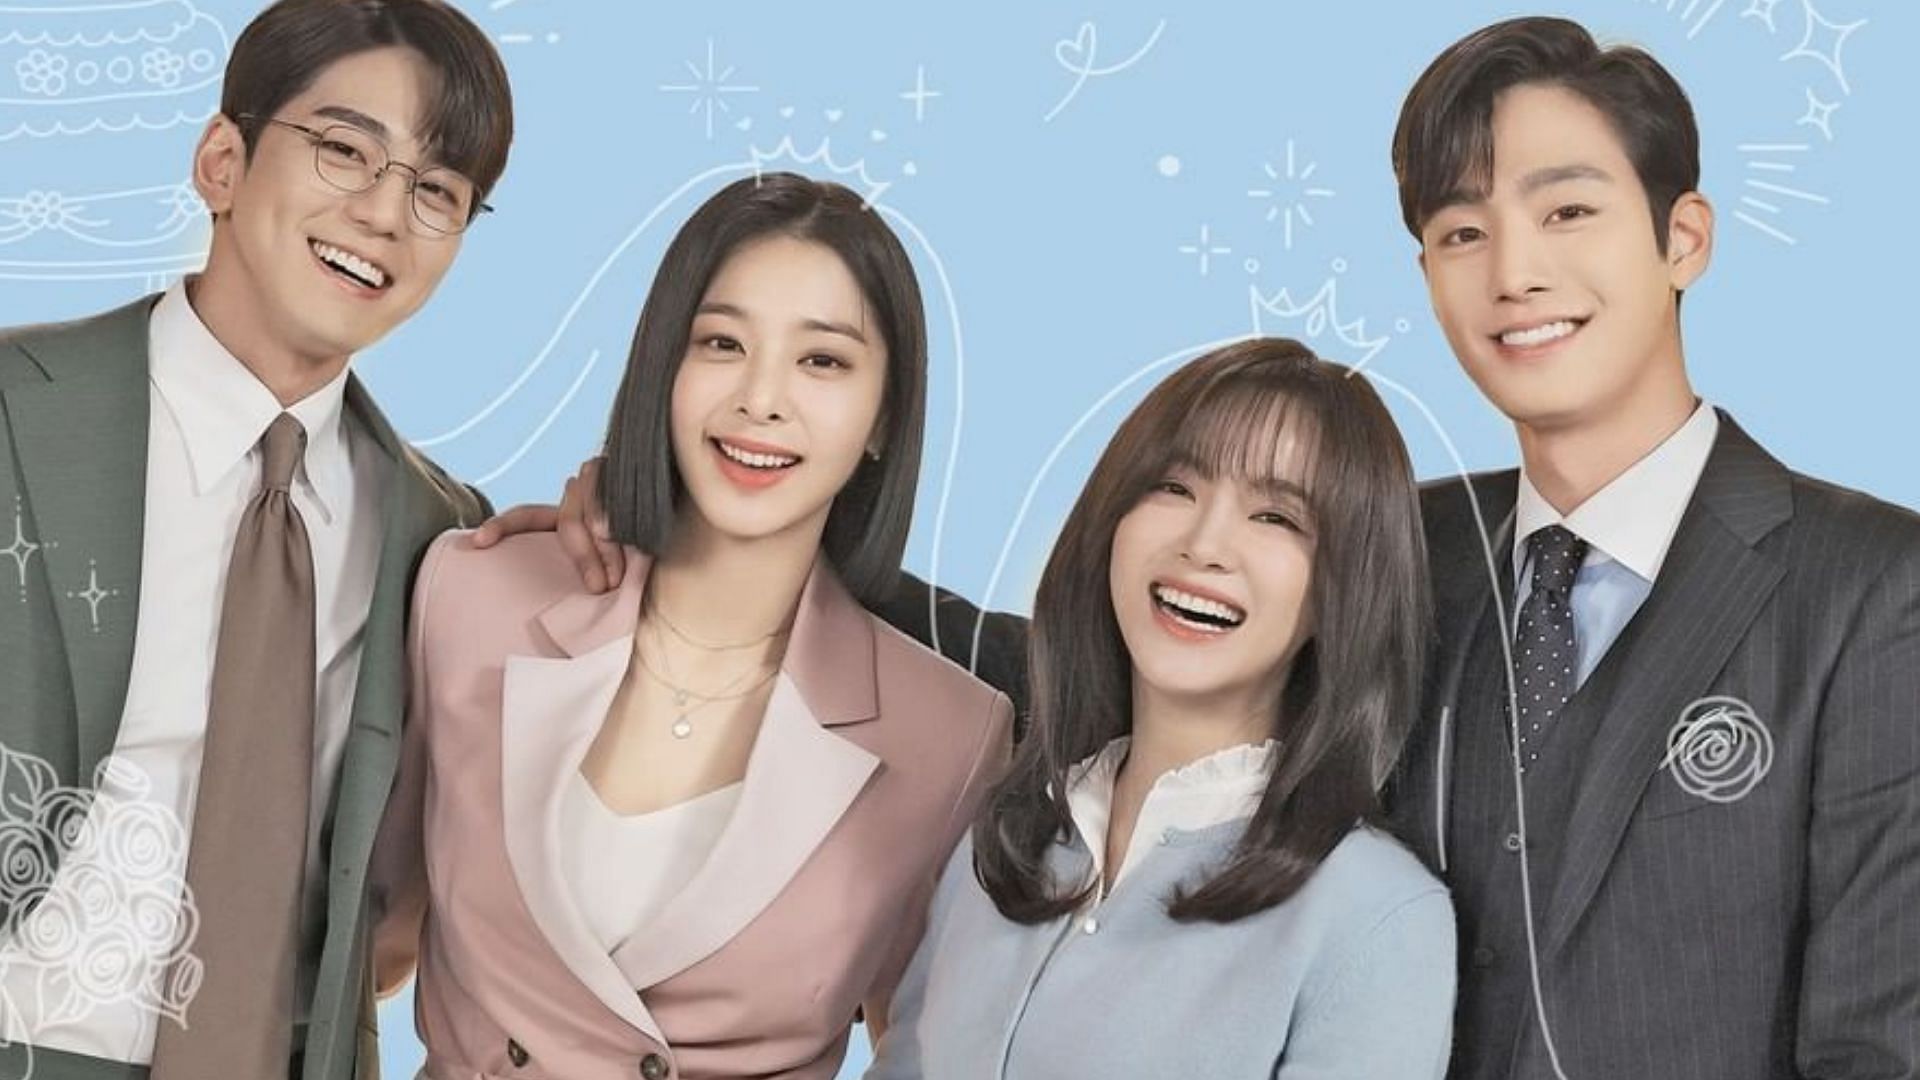 The cast of Business Proposal make a splash with their make-up shots